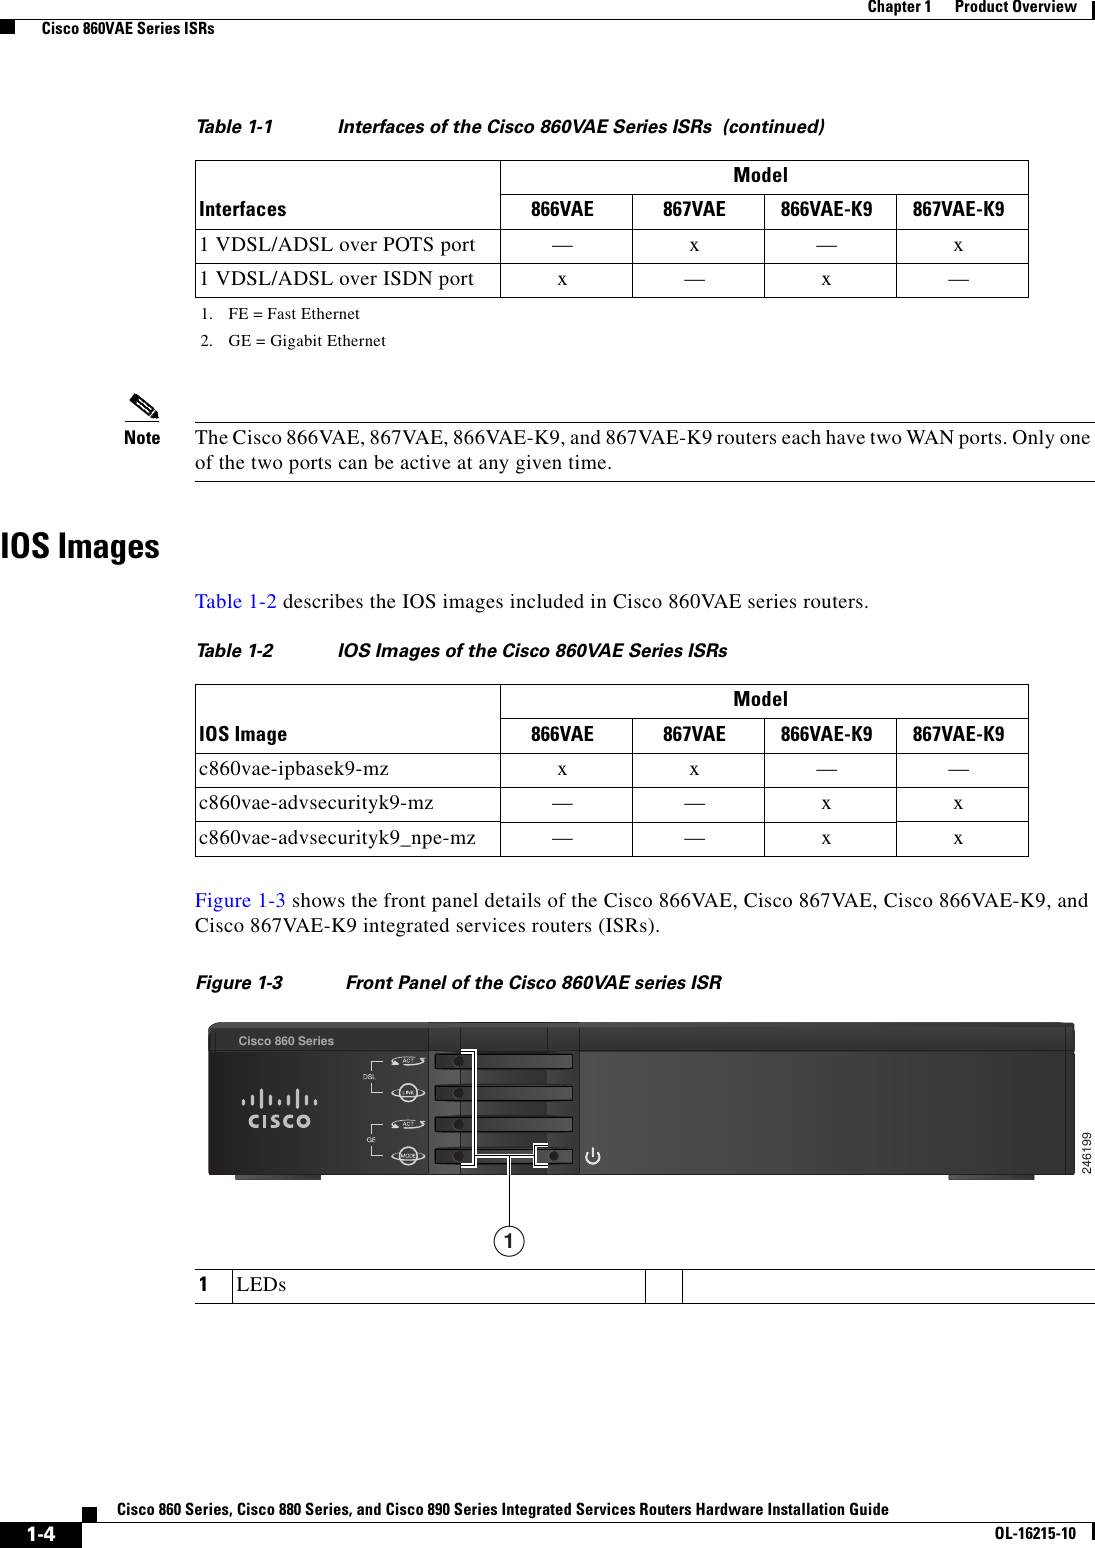  1-4Cisco 860 Series, Cisco 880 Series, and Cisco 890 Series Integrated Services Routers Hardware Installation GuideOL-16215-10Chapter 1      Product Overview  Cisco 860VAE Series ISRsNote The Cisco 866VAE, 867VAE, 866VAE-K9, and 867VAE-K9 routers each have two WAN ports. Only one of the two ports can be active at any given time.IOS ImagesTable 1-2 describes the IOS images included in Cisco 860VAE series routers.Figure 1-3 shows the front panel details of the Cisco 866VAE, Cisco 867VAE, Cisco 866VAE-K9, and Cisco 867VAE-K9 integrated services routers (ISRs).Figure 1-3 Front Panel of the Cisco 860VAE series ISR1 VDSL/ADSL over POTS port — x — x1 VDSL/ADSL over ISDN port x — x —1. FE = Fast Ethernet2. GE = Gigabit EthernetTable 1-1 Interfaces of the Cisco 860VAE Series ISRs  (continued)InterfacesModel866VAE 867VAE 866VAE-K9 867VAE-K9Ta b l e  1-2 IOS Images of the Cisco 860VAE Series ISRsIOS ImageModel866VAE 867VAE 866VAE-K9 867VAE-K9c860vae-ipbasek9-mz x x — —c860vae-advsecurityk9-mz — — x xc860vae-advsecurityk9_npe-mz — — x x1LEDs246199Cisco 860 Series1